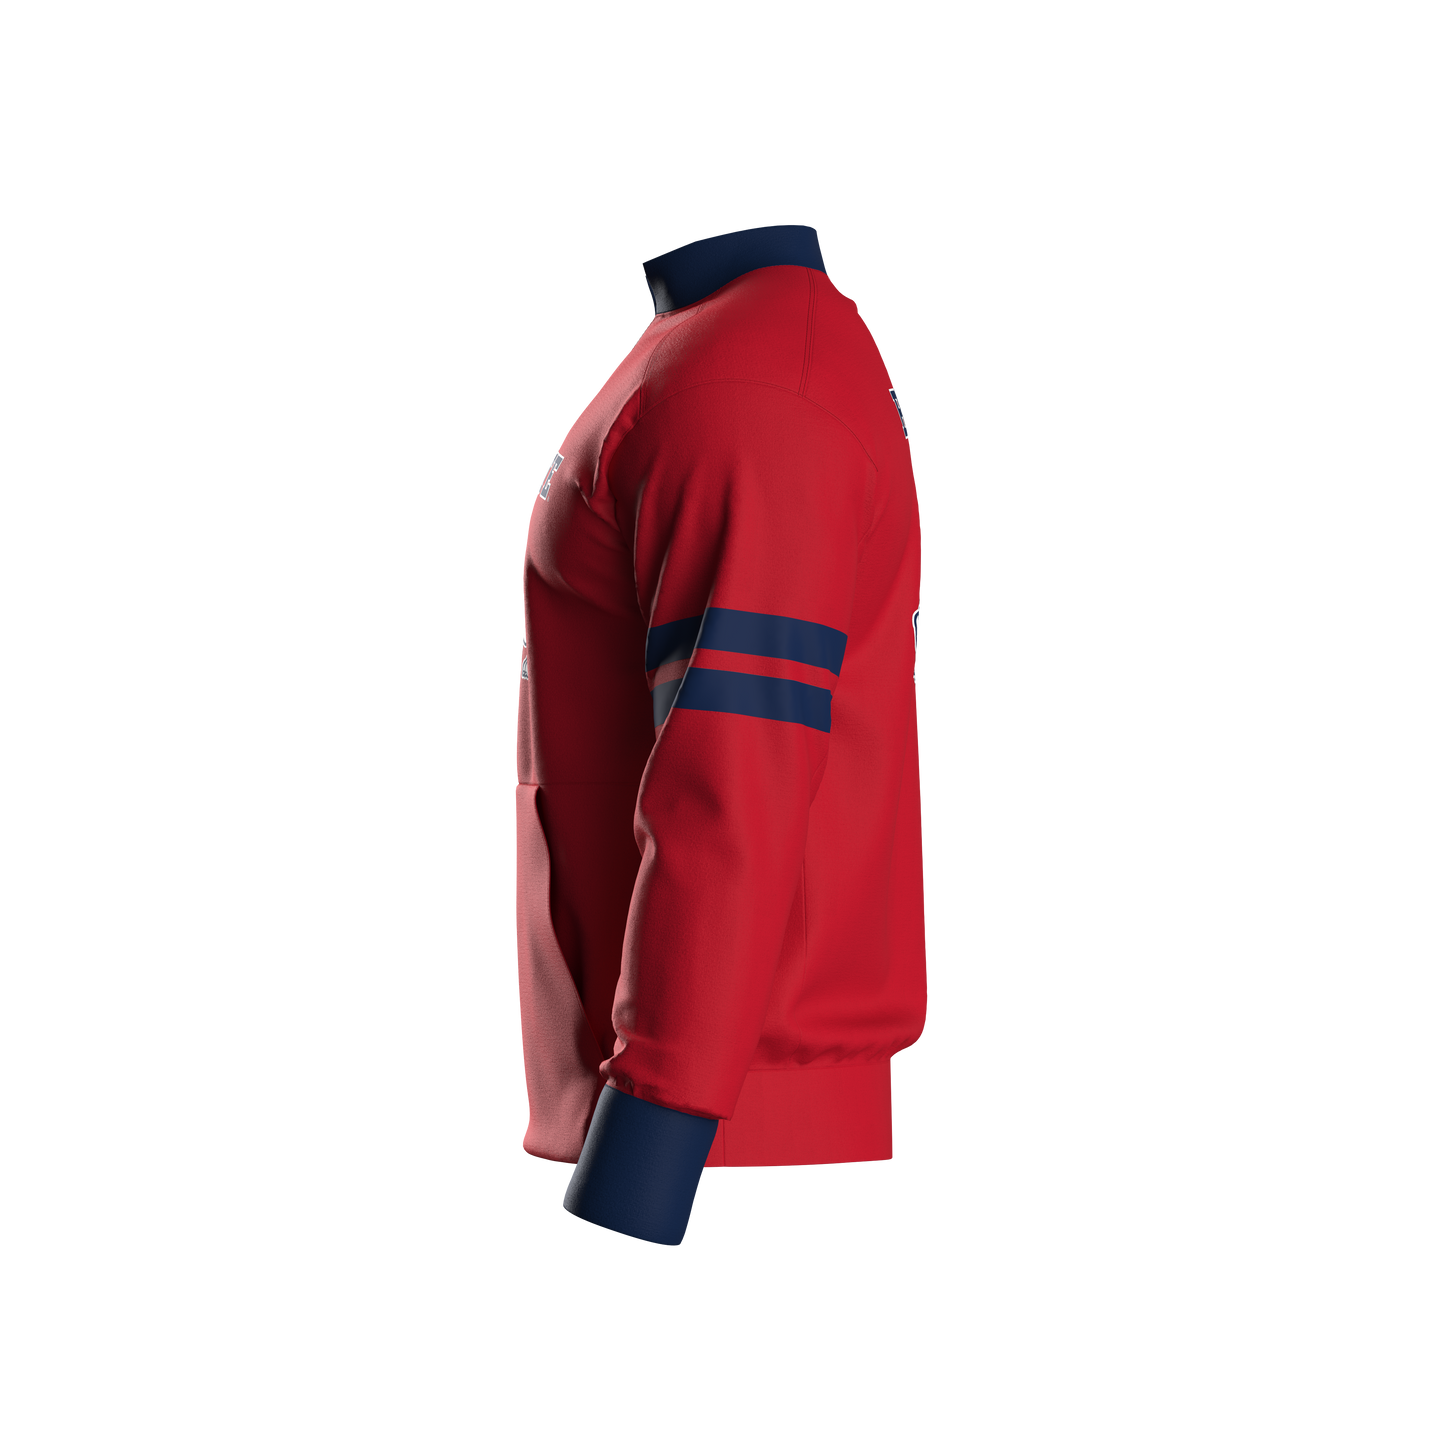 Fresno State University Away Pullover (adult)